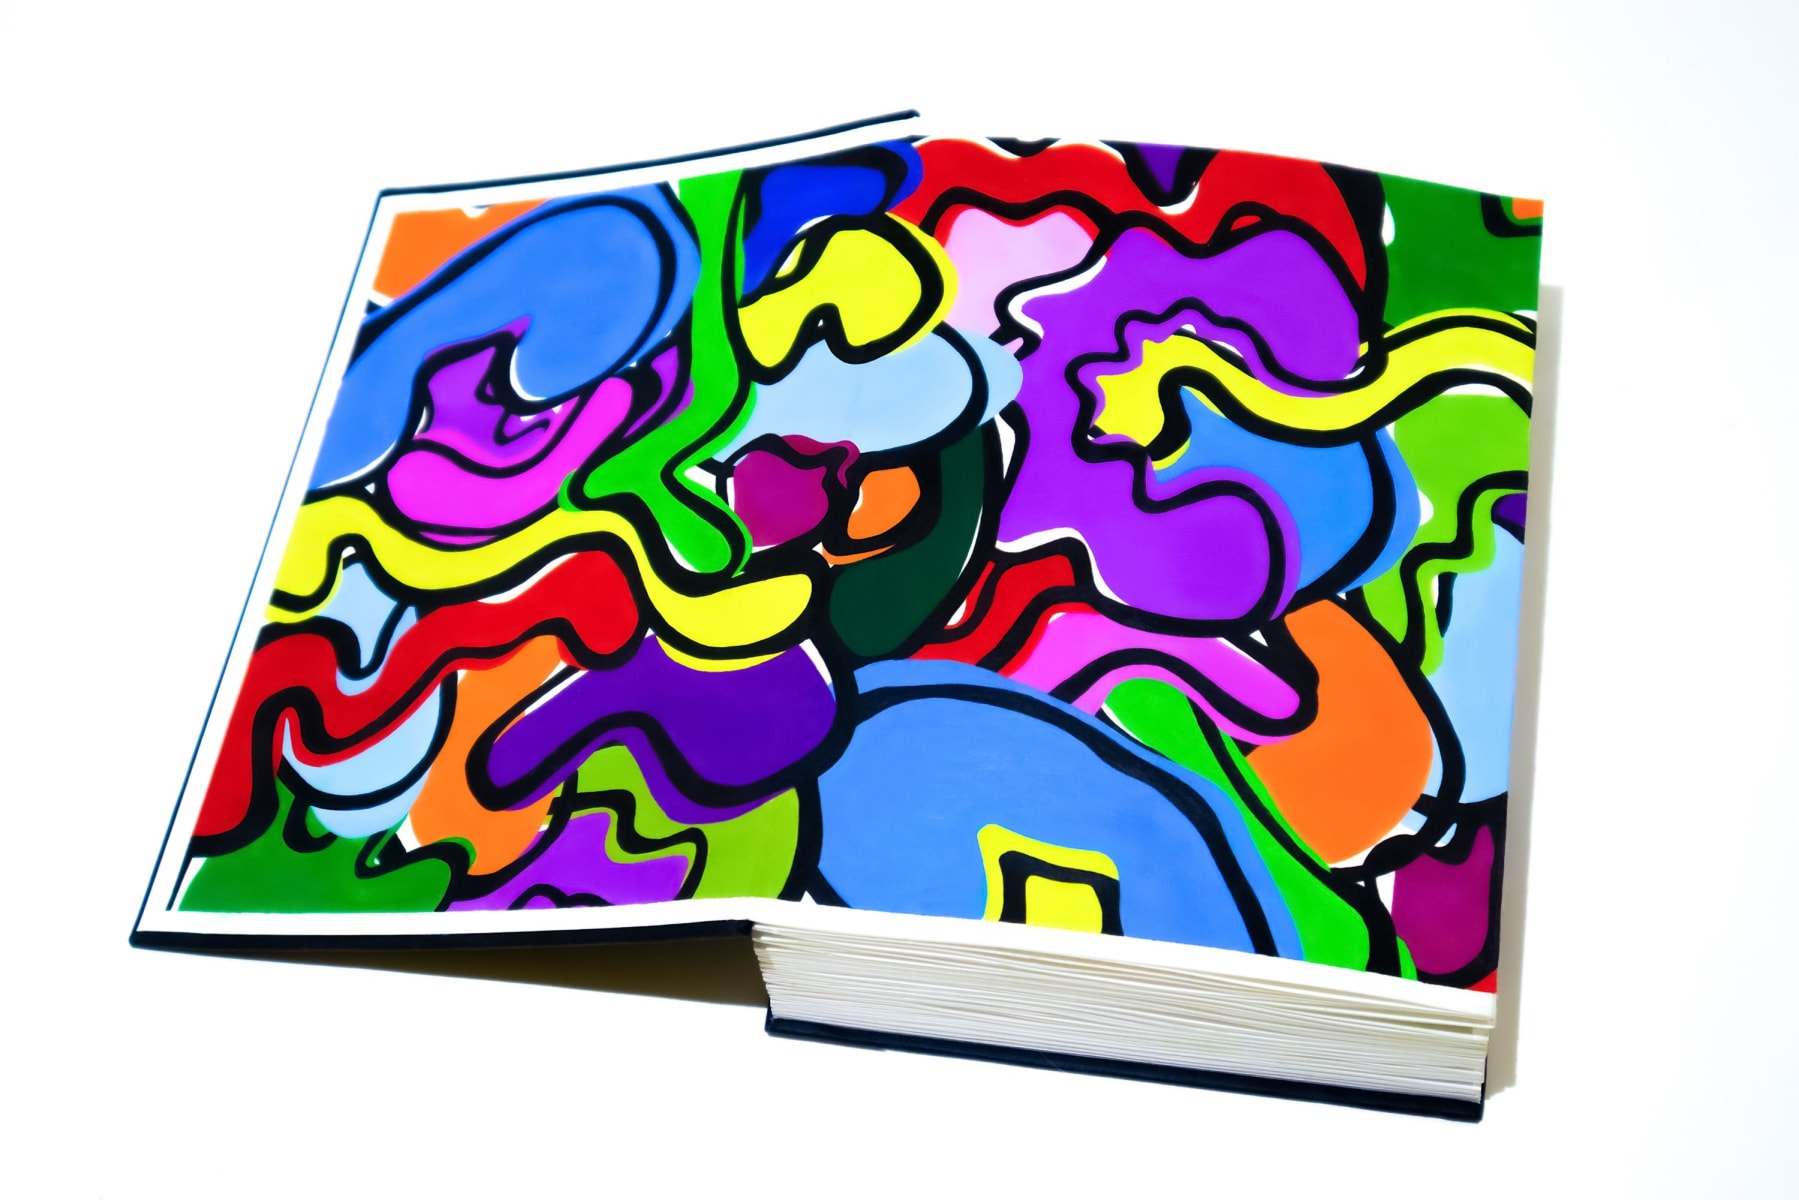 A thick spined book with a black cover is laid open on a white surface. The inside cover and front page is covered in brightly coloured organic shapes and outlined in black.